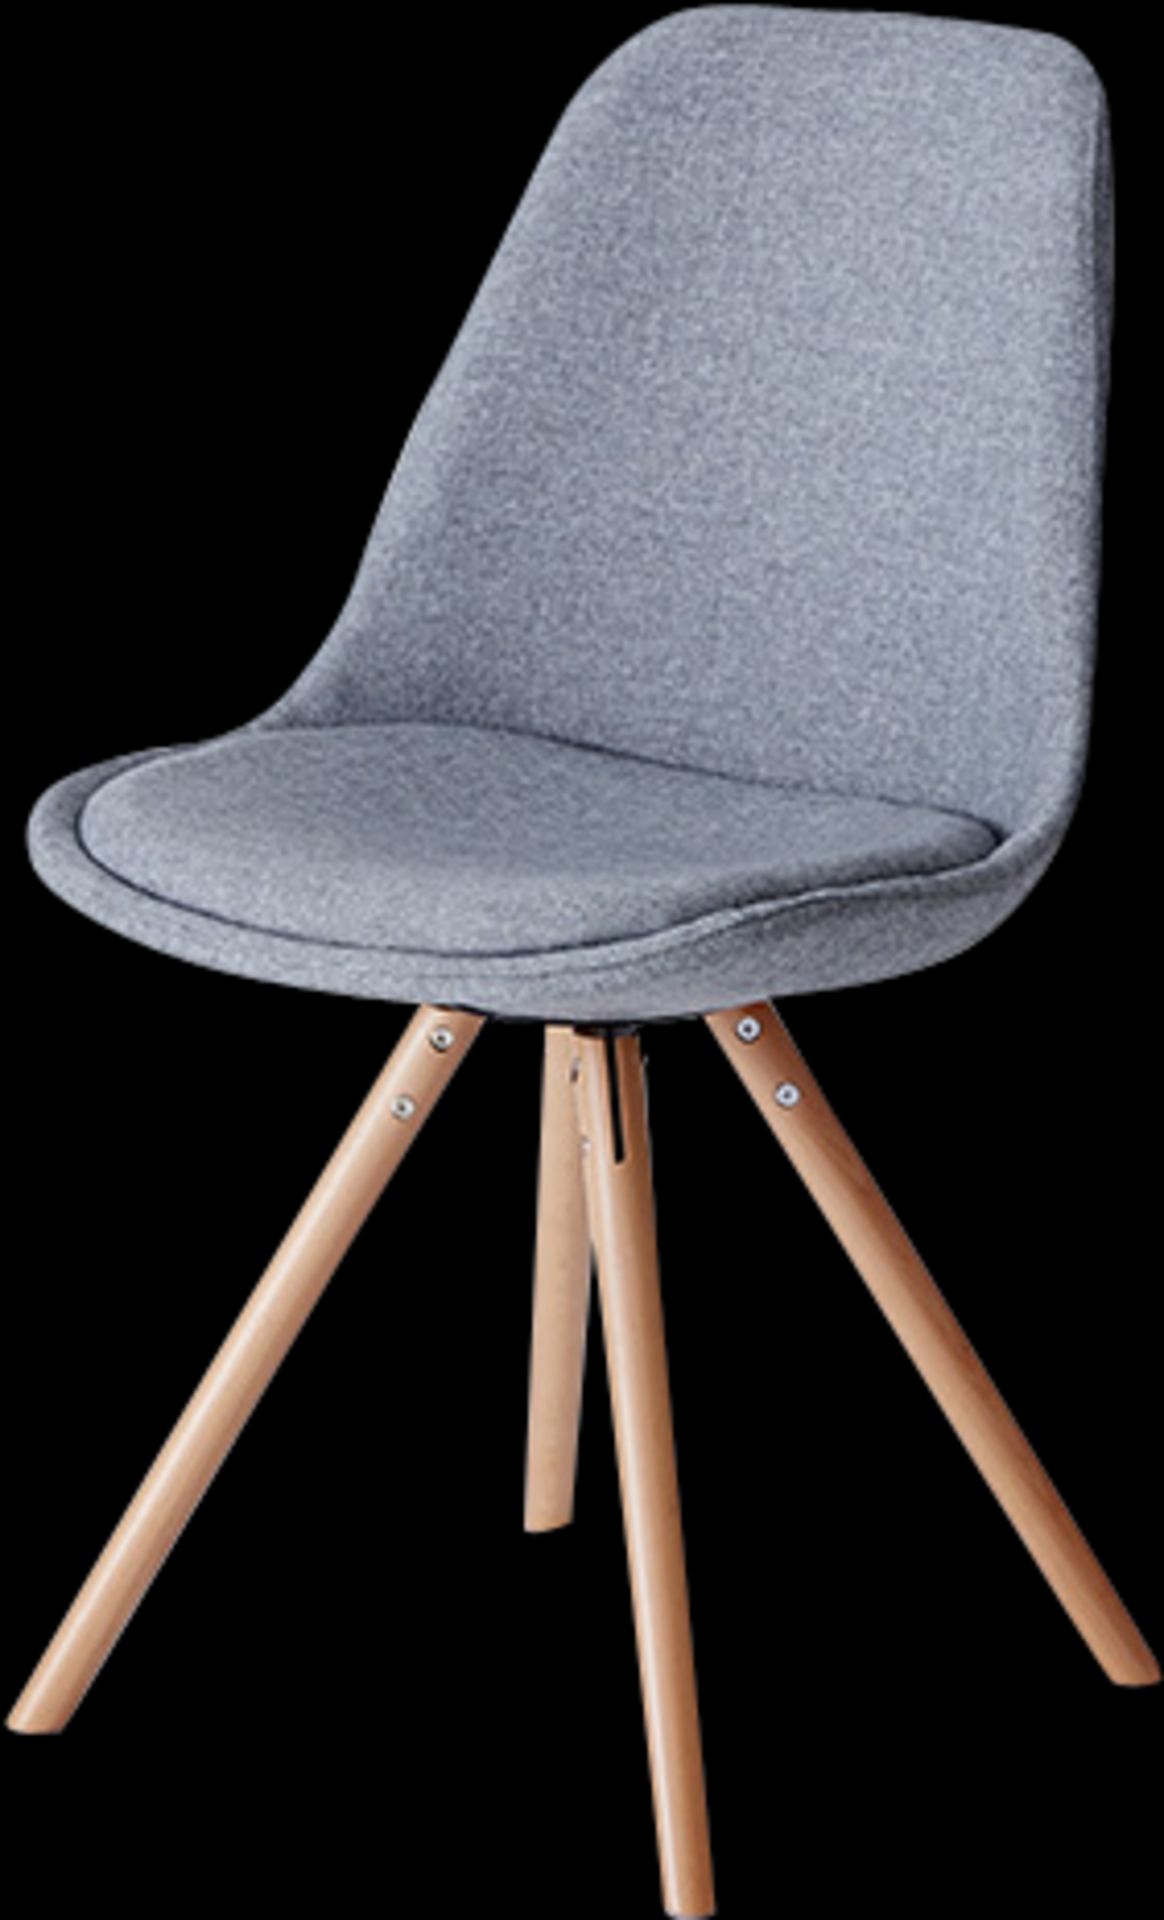 4 x Upholstered Turner Chair In Grey- Dimensions: 86(h) x 50(w) x 40(d) cm - Brand New Unboxed - Image 5 of 6